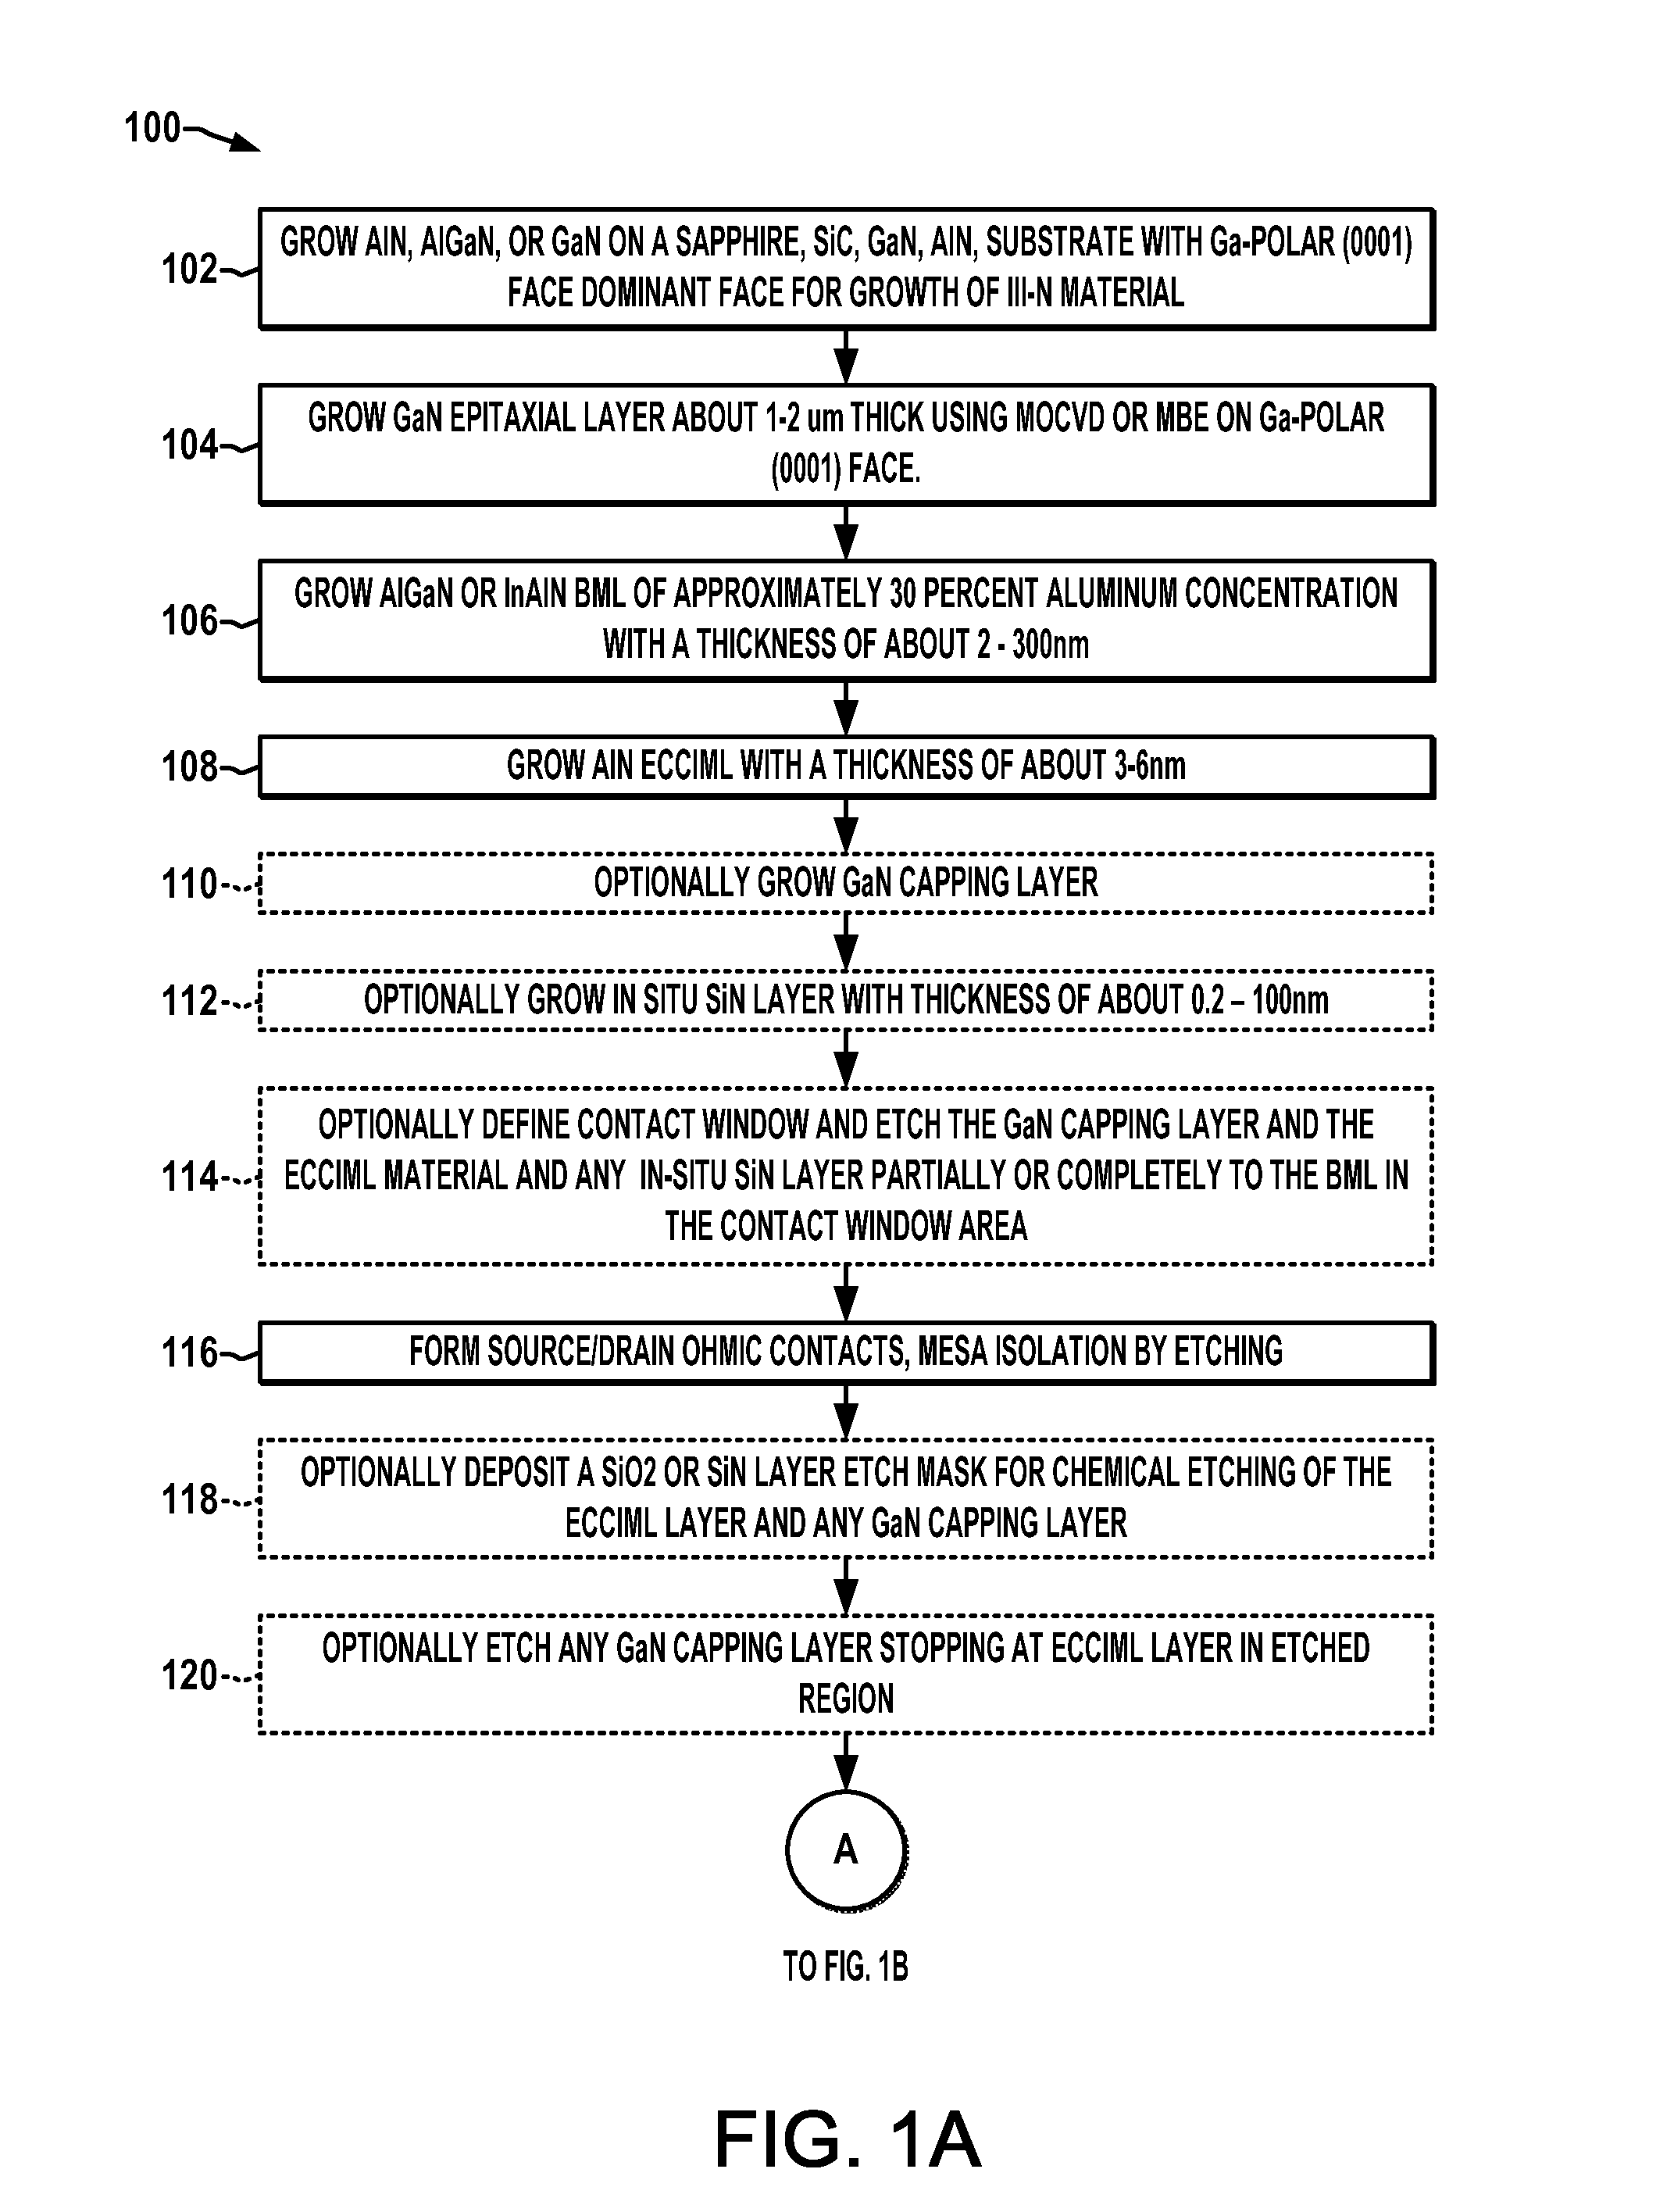 Transistor with enhanced channel charge inducing material layer and threshold voltage control